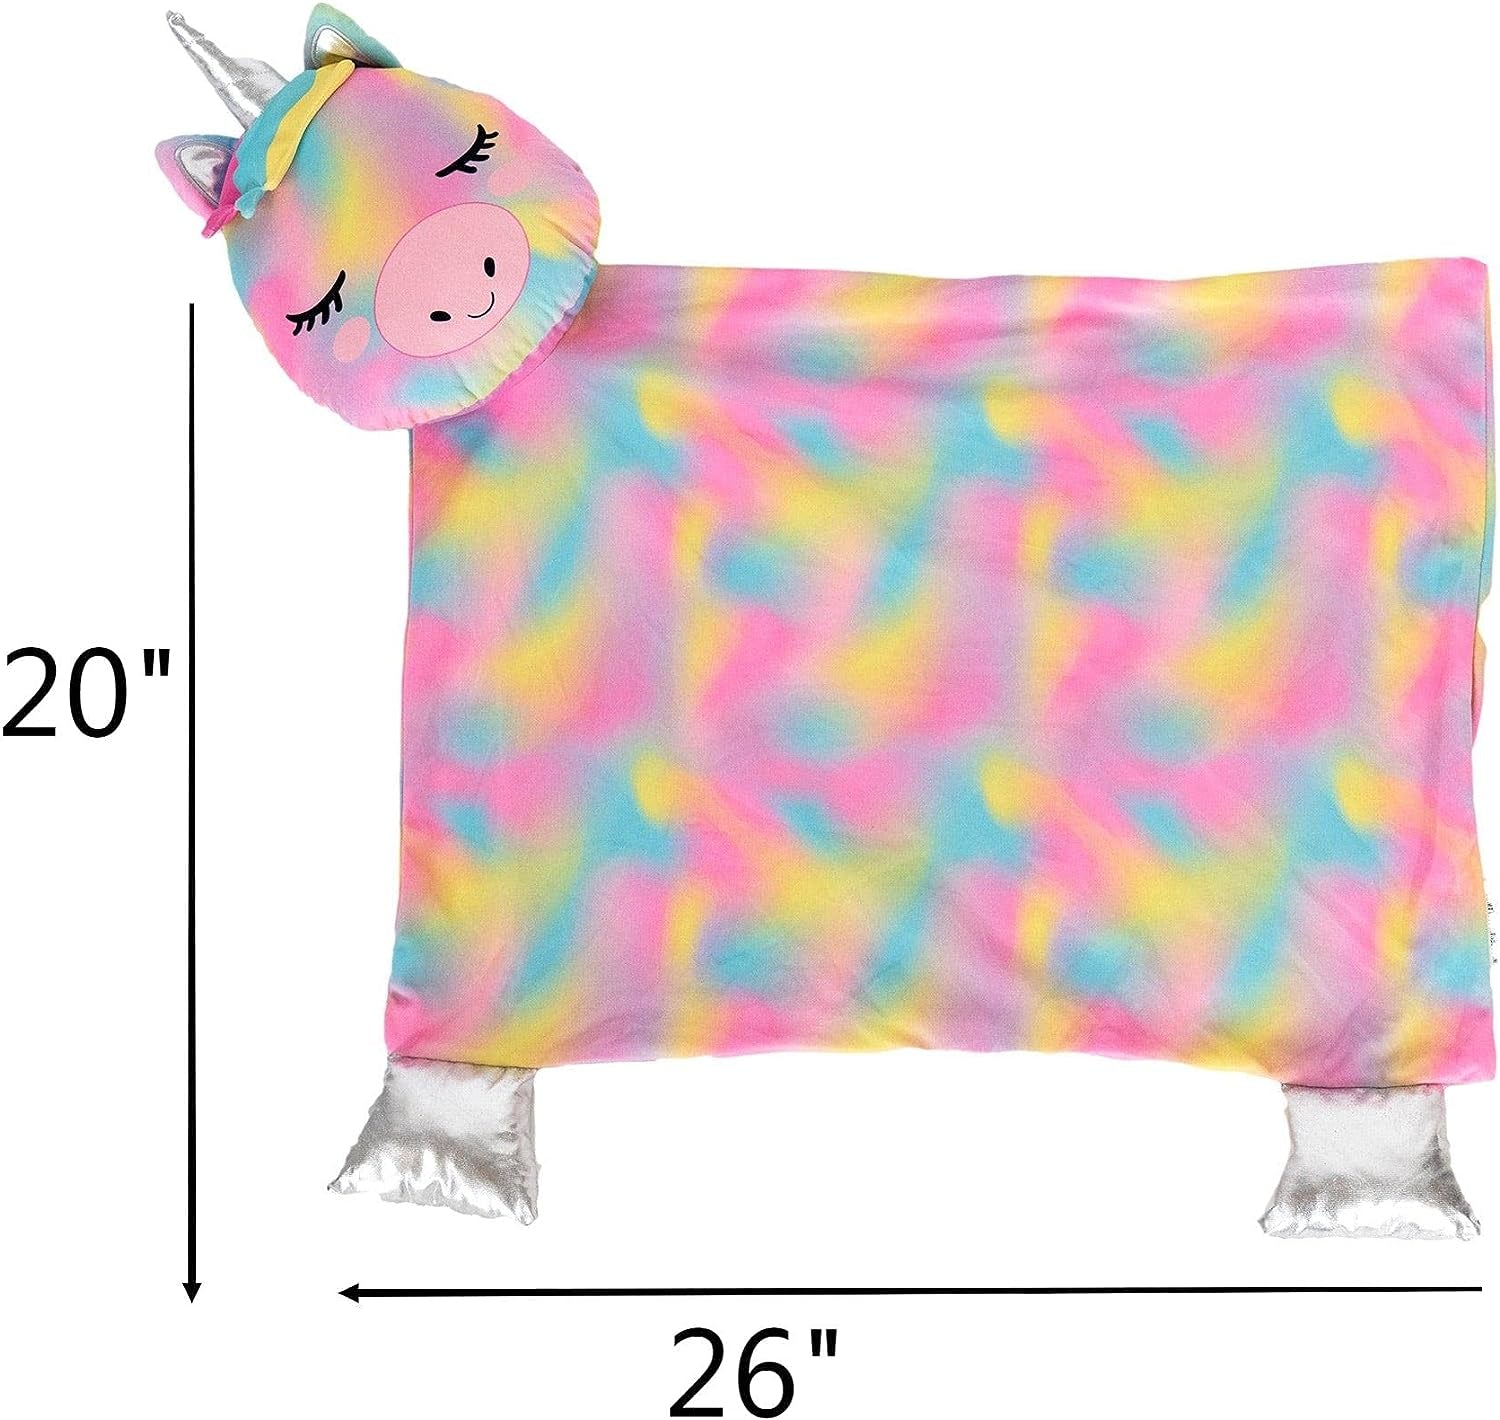 Plush Animal Pillow Case for Kids, 3D Design Fun Decorative Pillow Sham, Oeko TEX Certified, Standard Sized Lounge Pillow for Boys and Girls, Unicorn, Multicolor